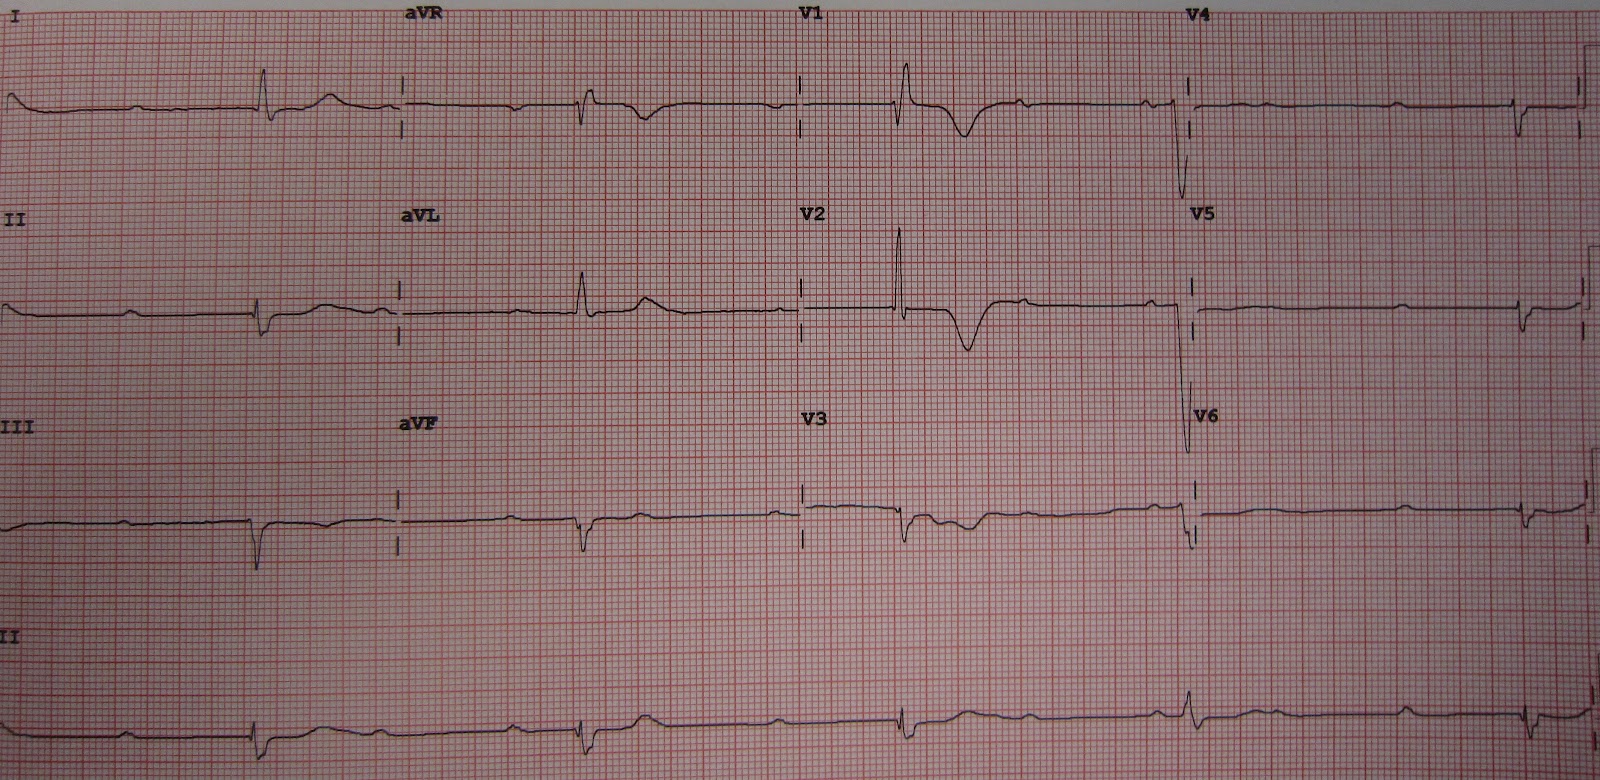 Note: P-P intervals equal, QRS-QRS intervals equal, heart rate 35